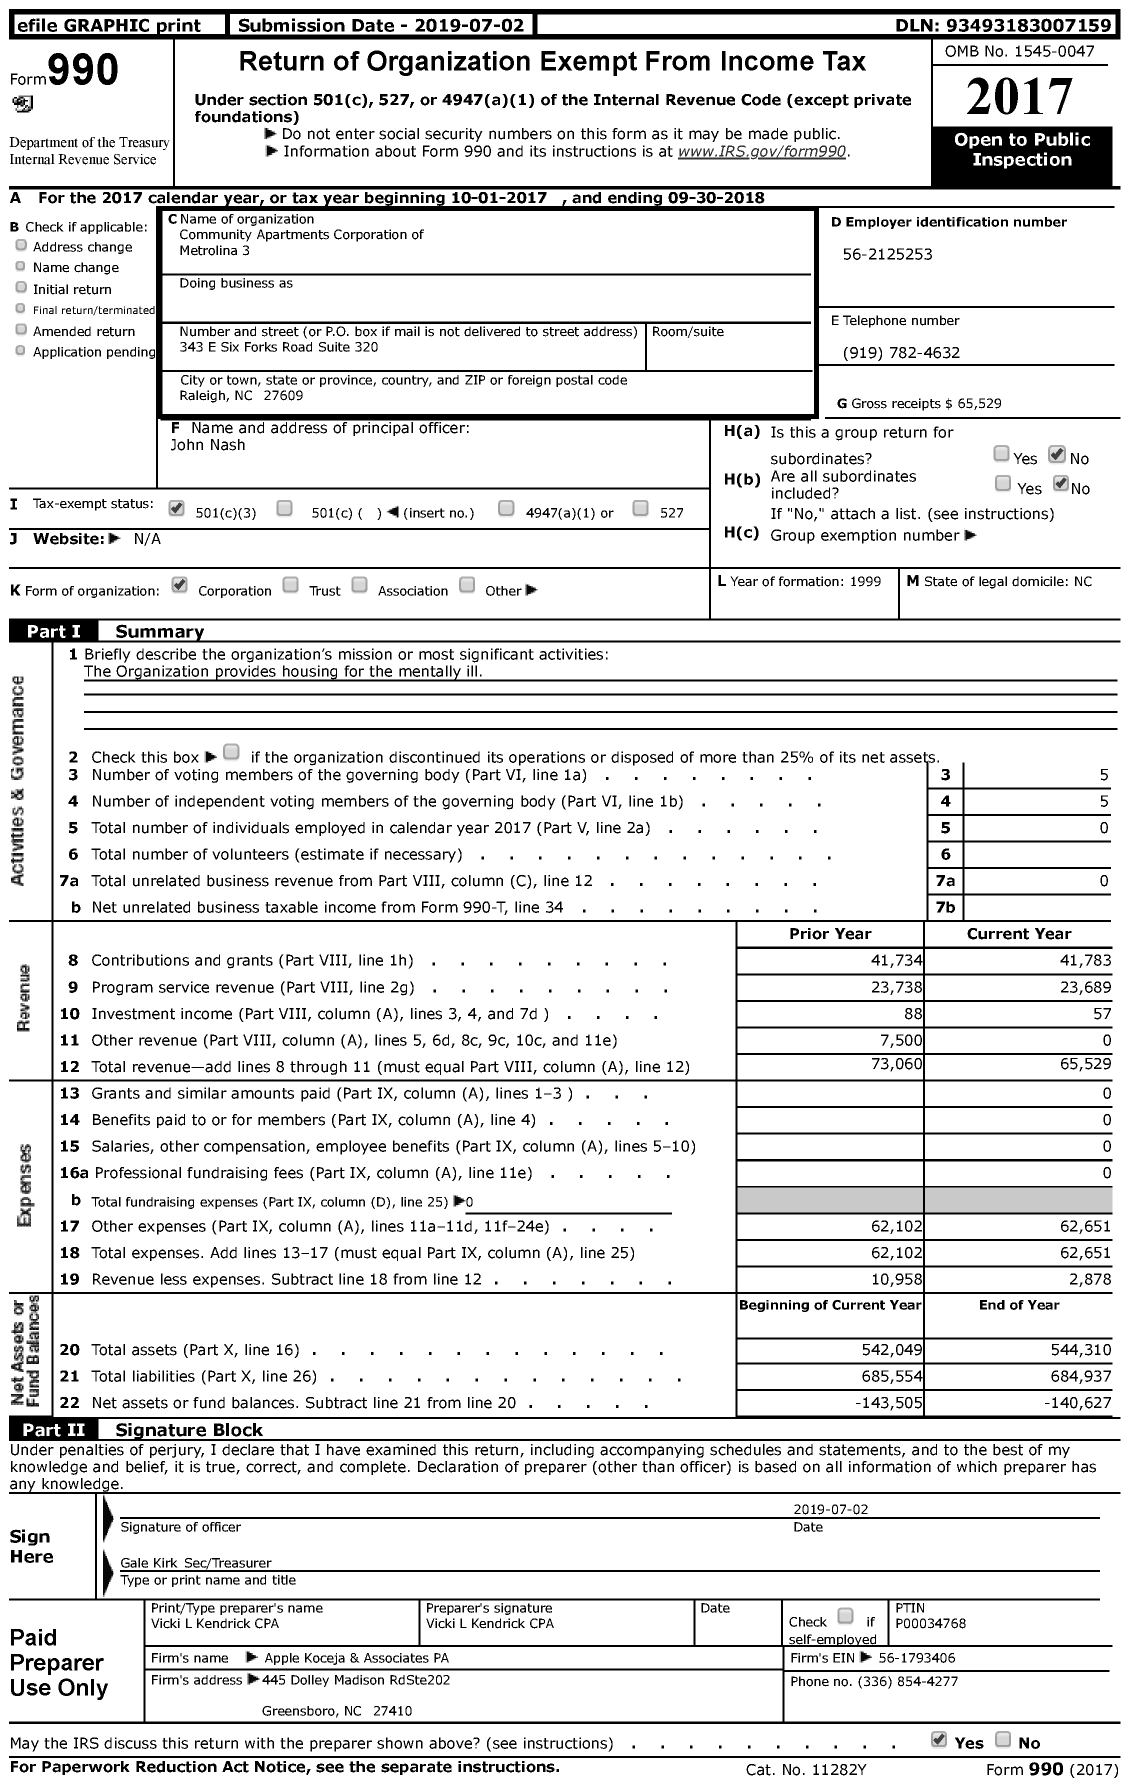 Image of first page of 2017 Form 990 for Community Apartments Corporation of Metrolina 3